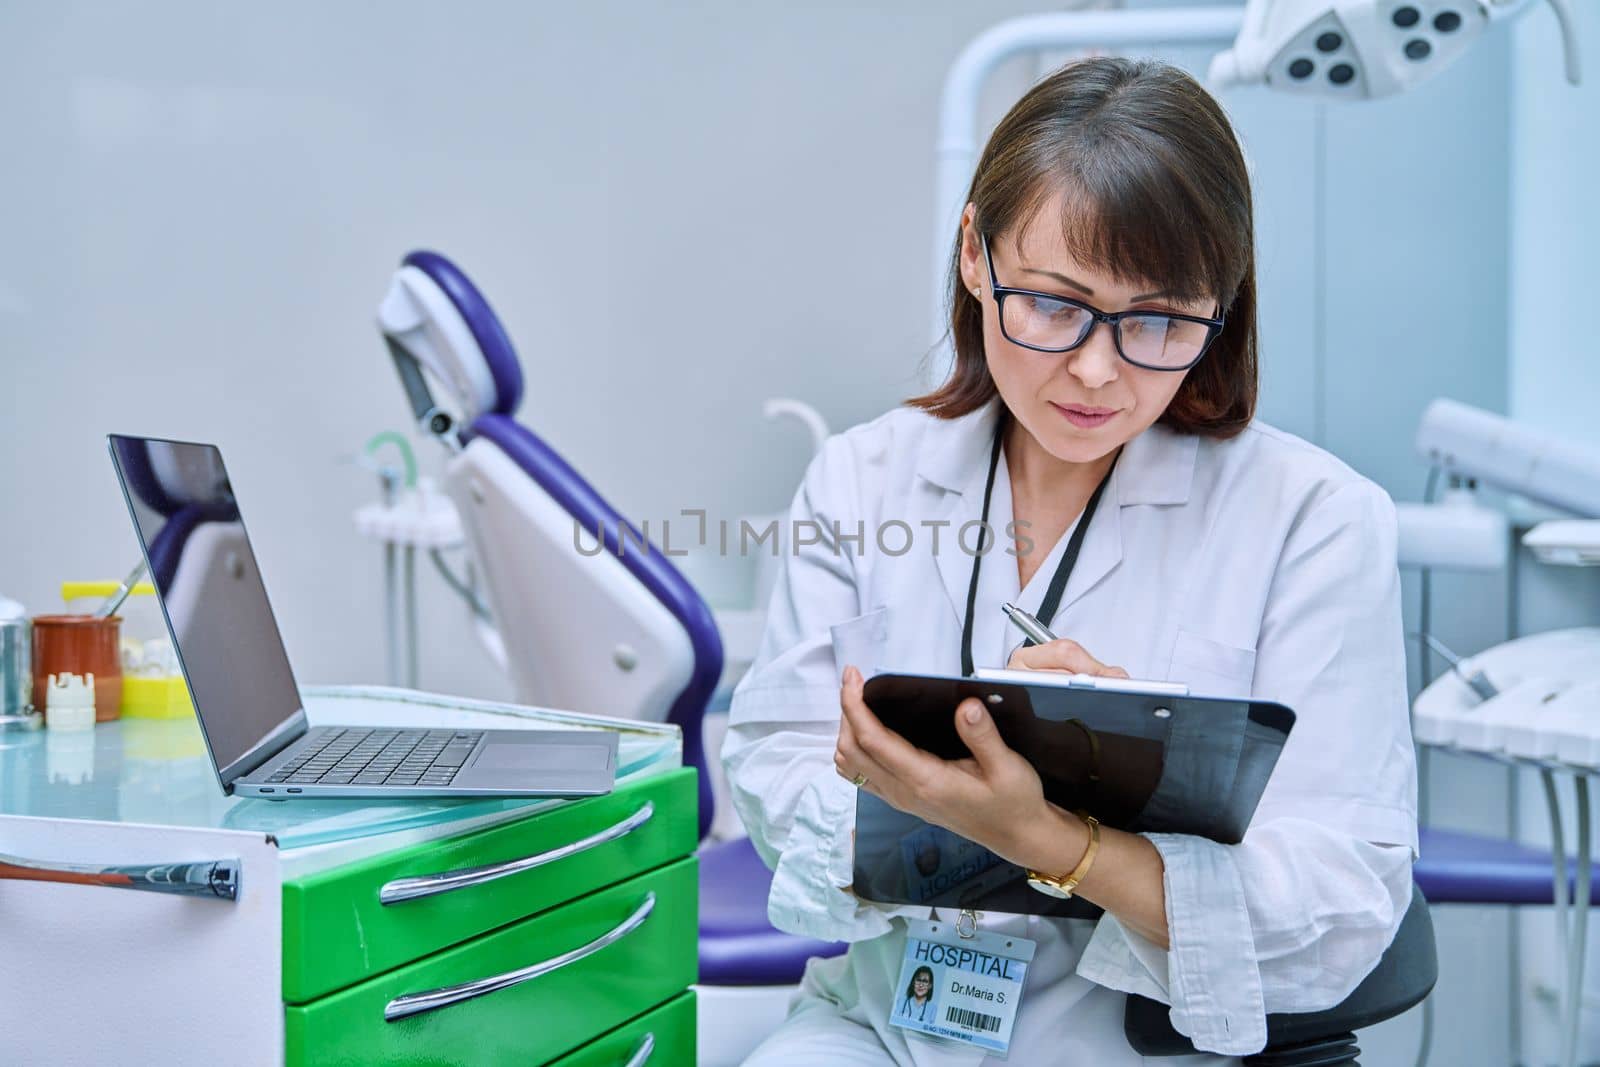 Doctor dentist working in office, using laptop, making notes on clipboard. Dentistry, medicine, hygiene, treatment, dental health care concept